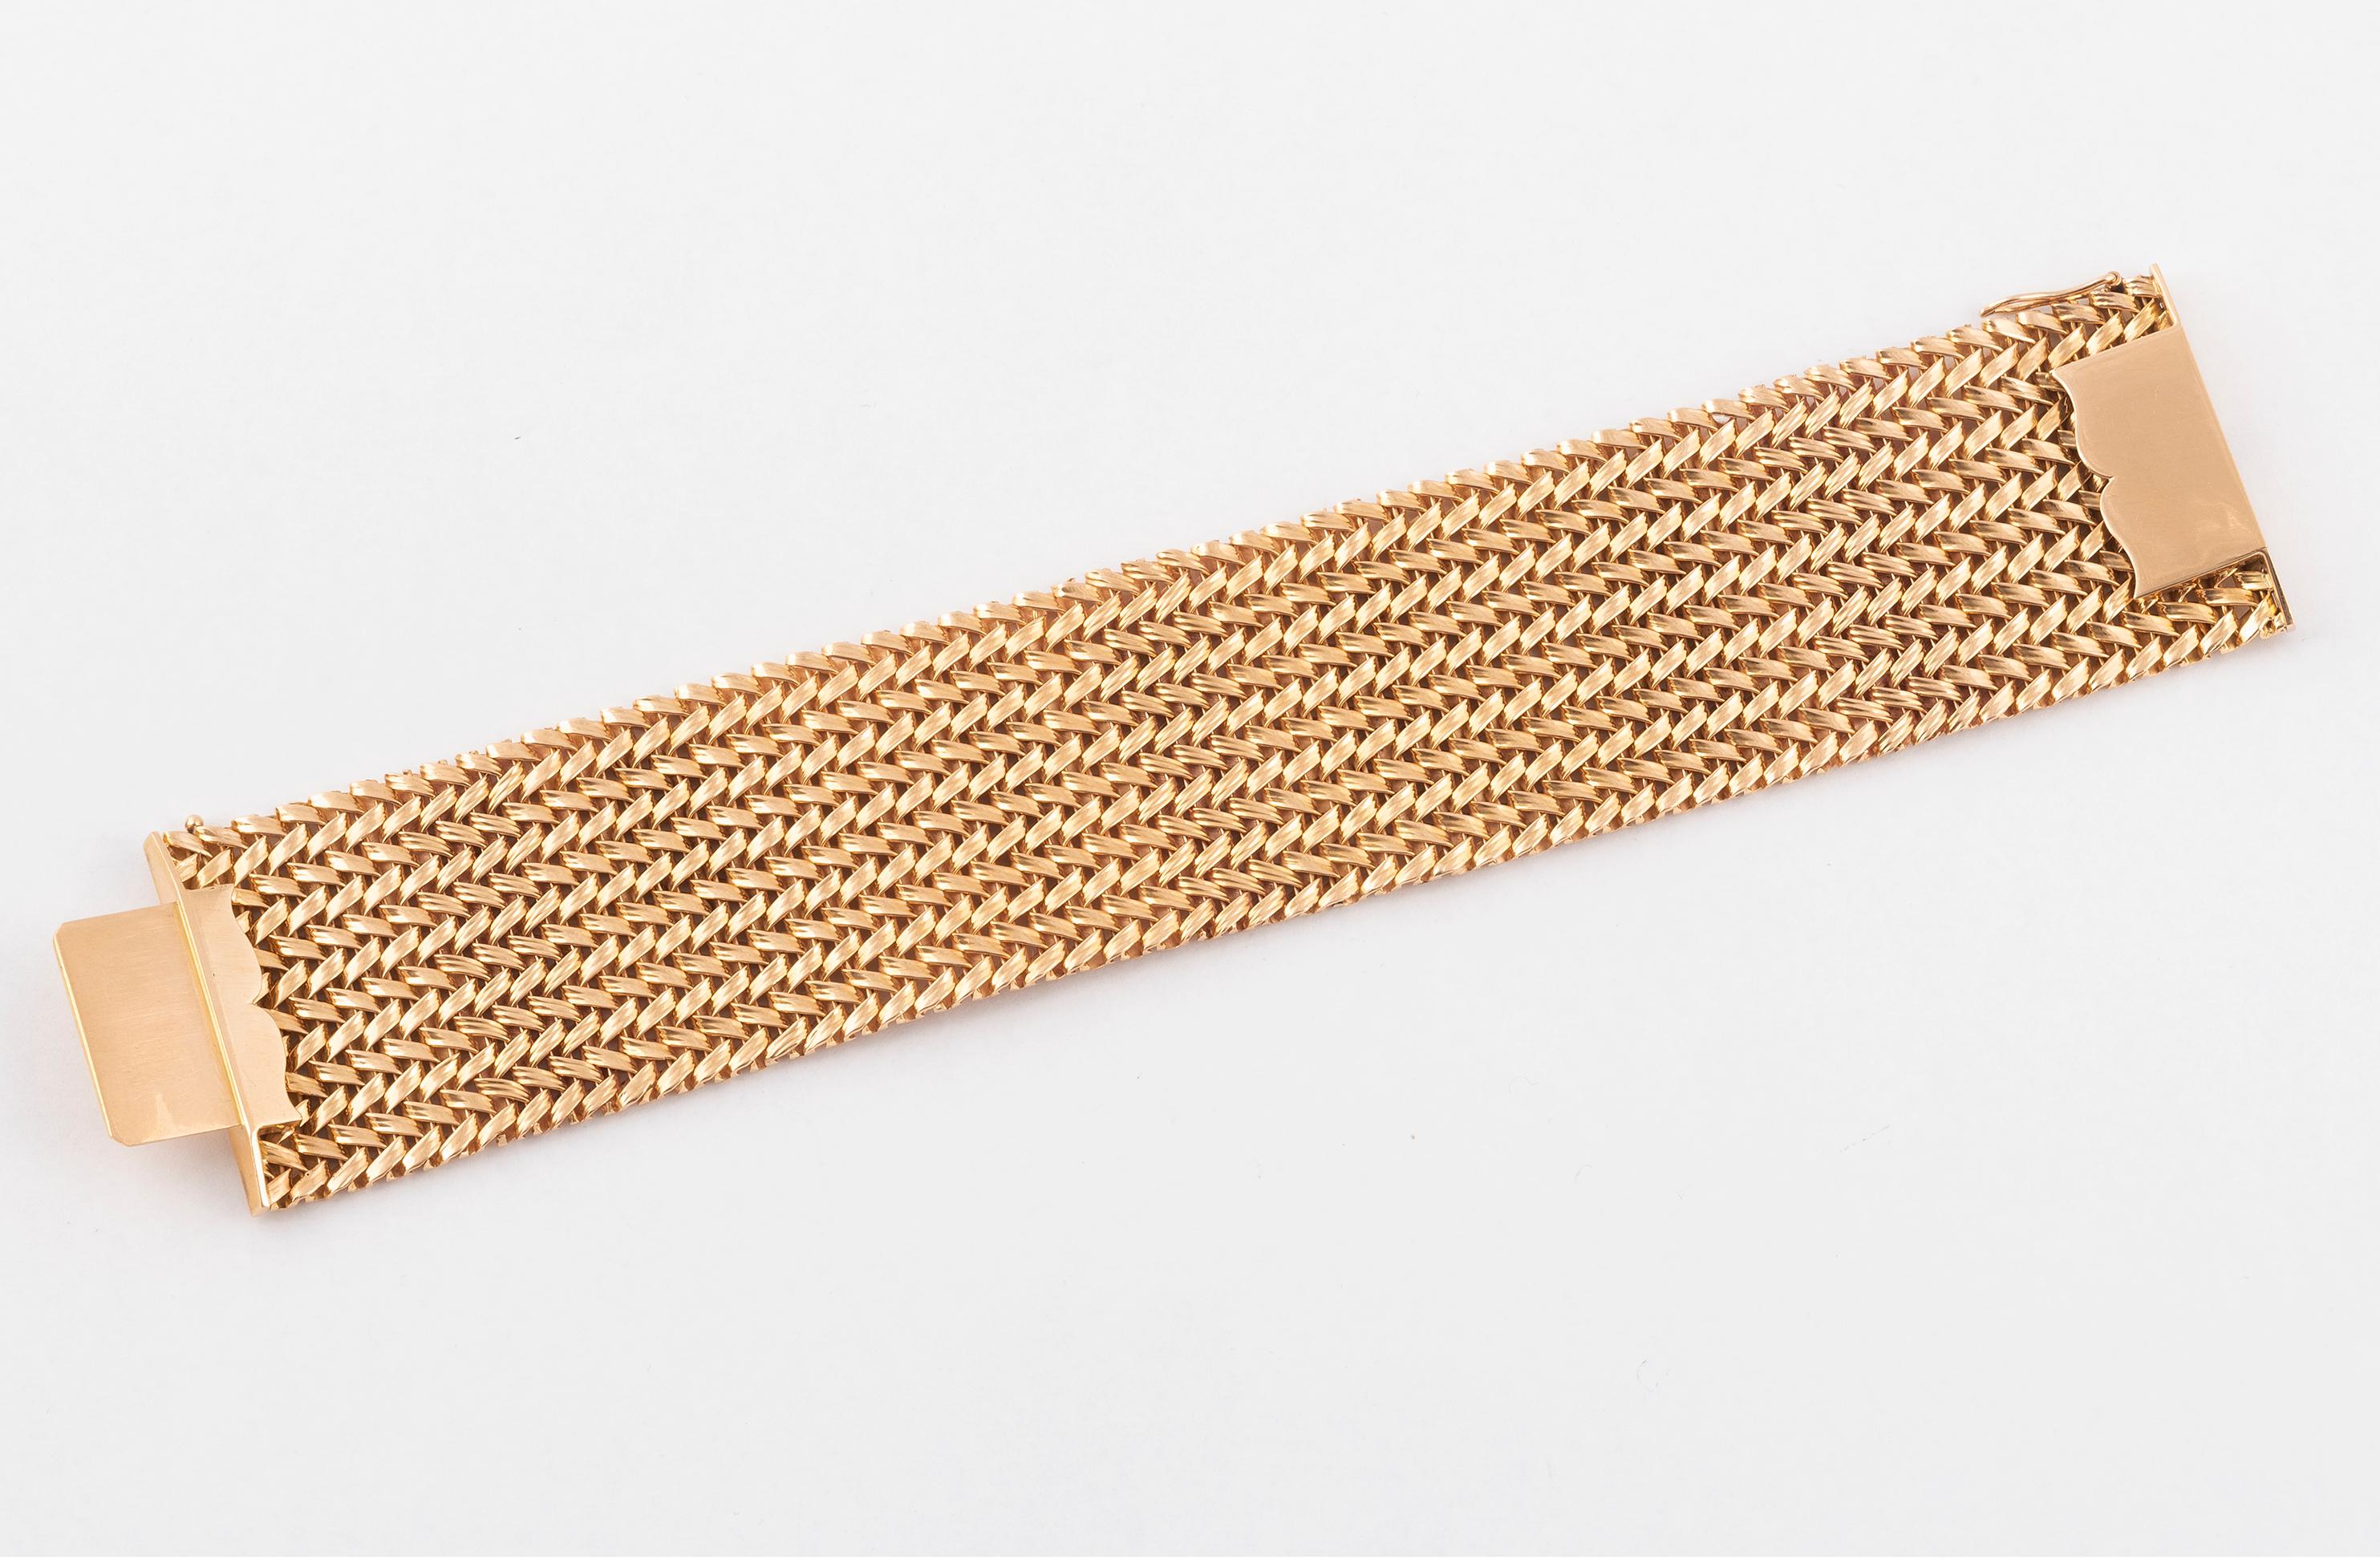 A vintage 18ct gold wide flexible mesh bracelet, measuring approximately 18 x 3,5cm, made in yellow gold, circa 1960, hallmarked 18ct gold, France, gross weight 79 grams.

This vintage bracelet is in excellent condition.